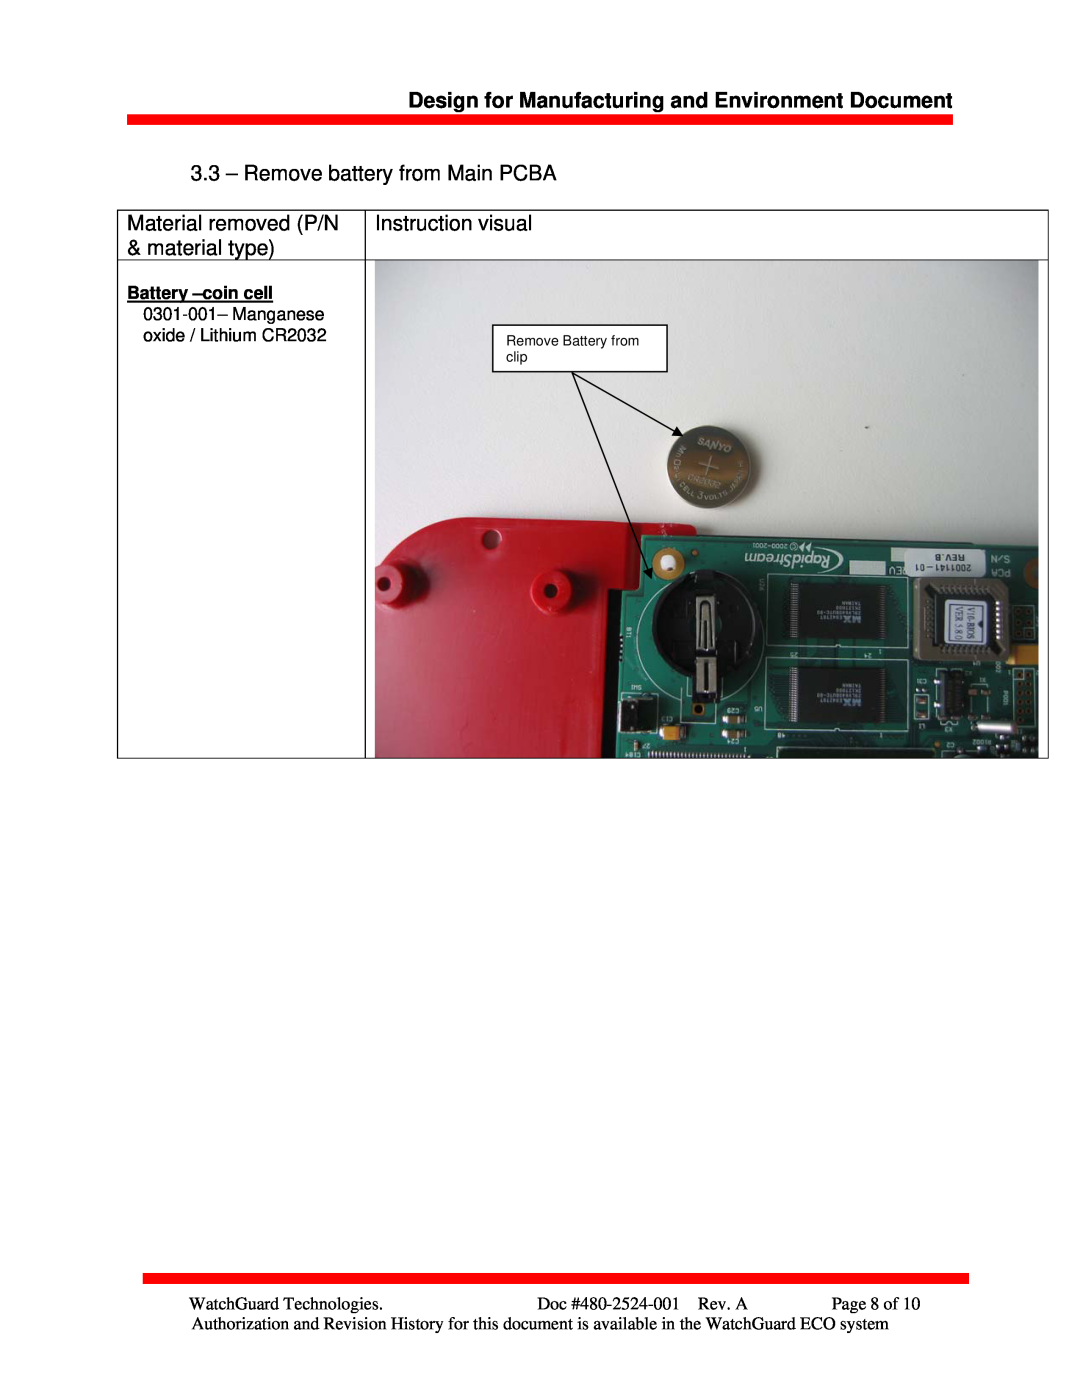 WatchGuard Technologies 480-2524-001 Remove battery from Main PCBA, Design for Manufacturing and Environment Document 